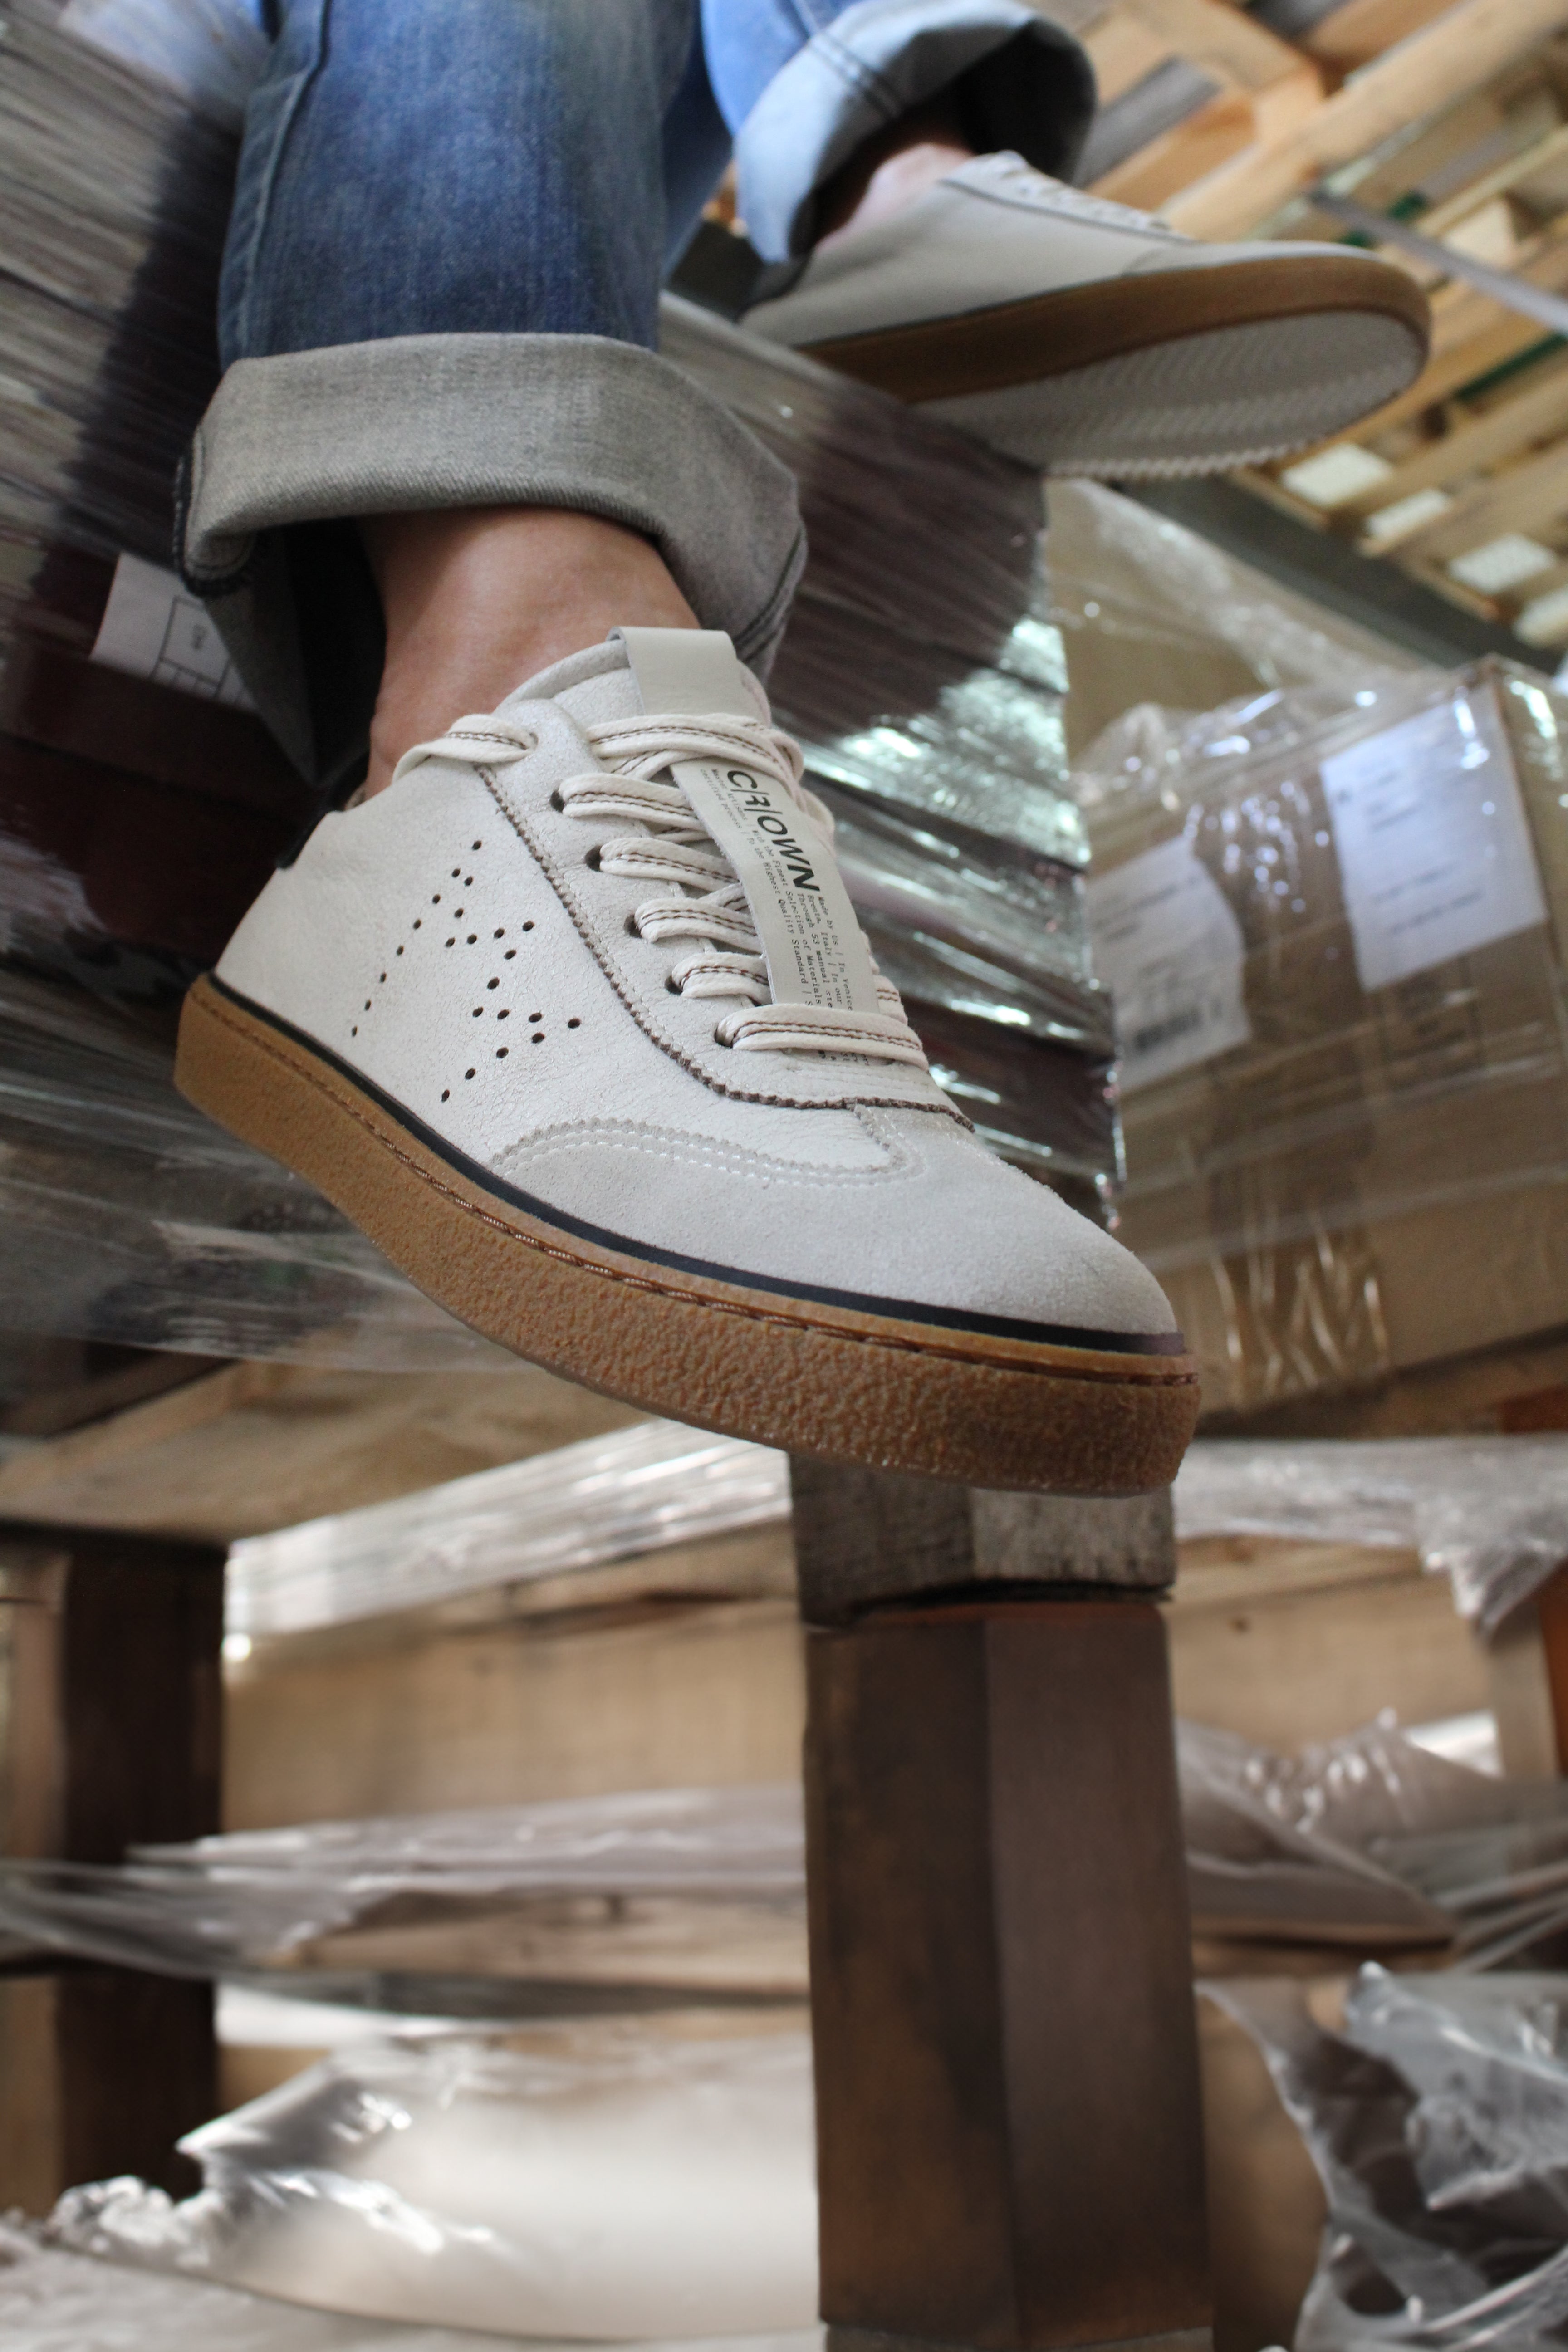 Model T low top sneaker style in white from the Leather C|R|OWN collection.